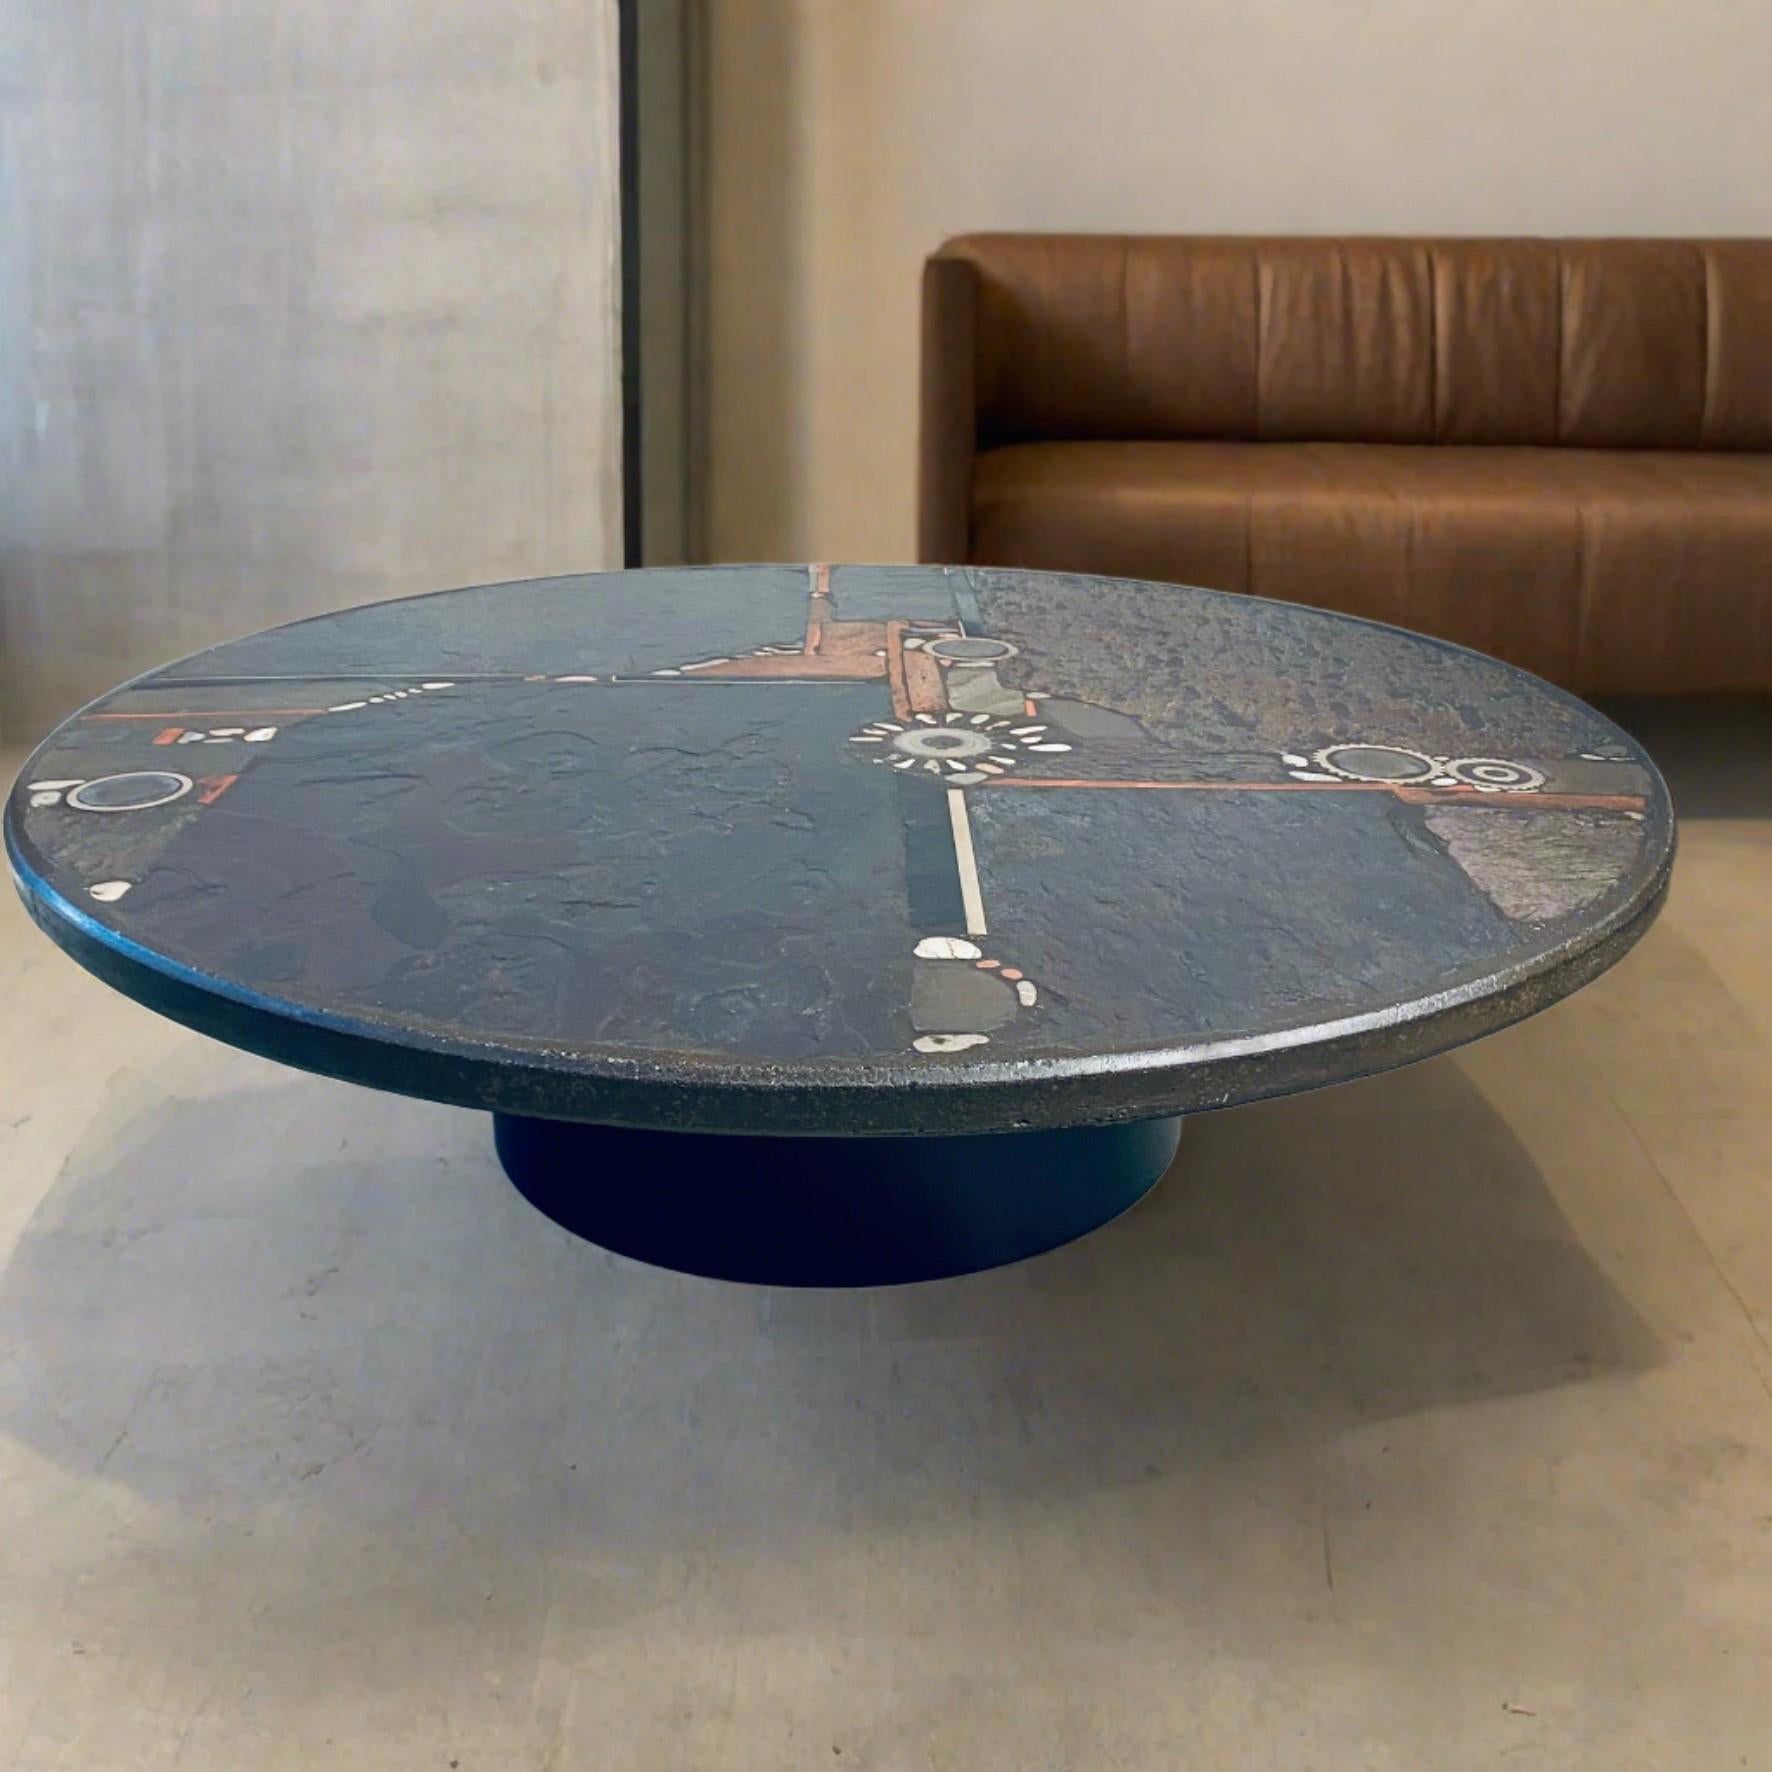 Dutch Brutalist Round Coffee Table by Sculptor Paul Kingma, Netherlands, 1984